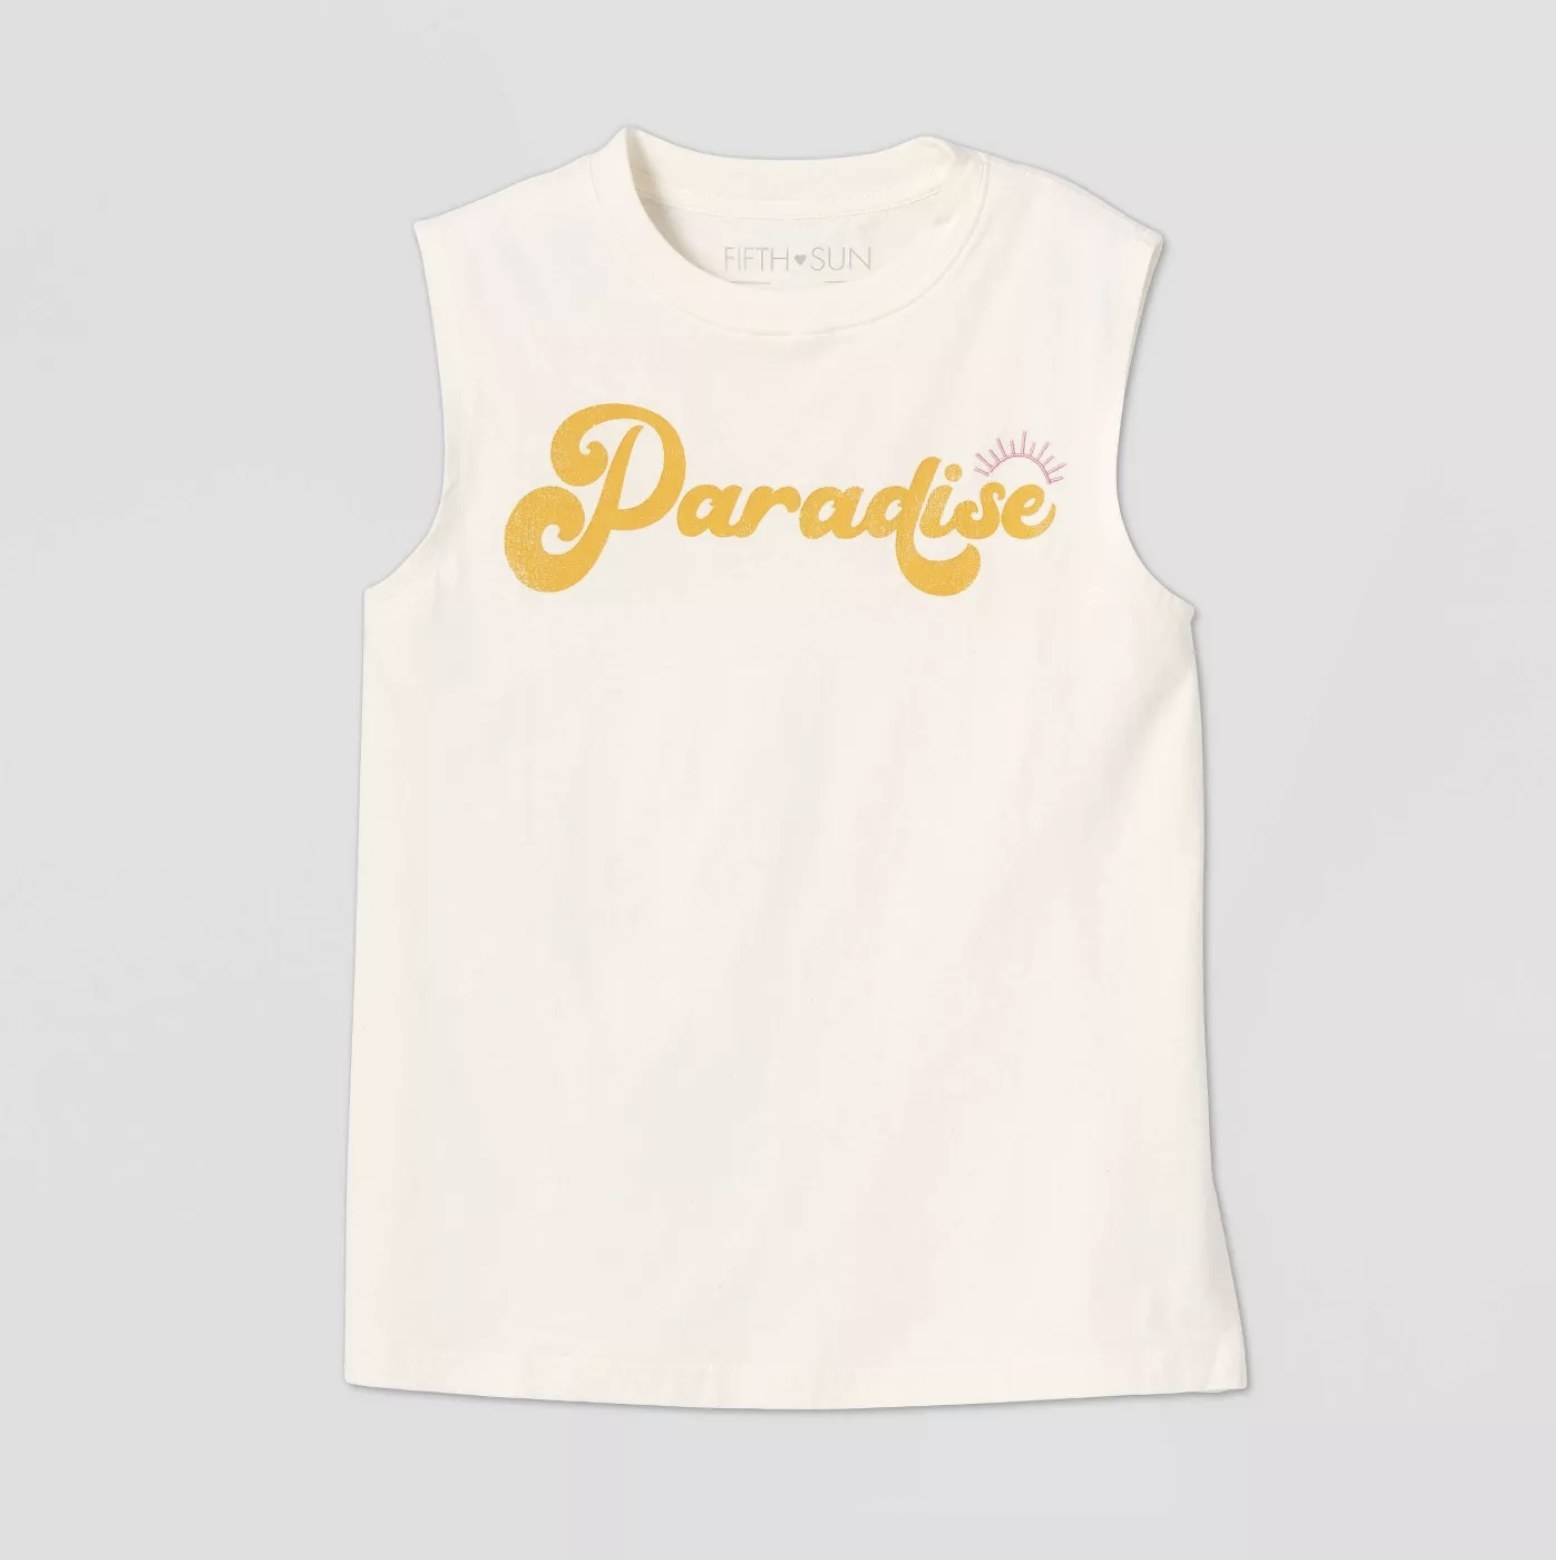 An image of an off-white sleeveless top with the word &quot;Paradise&quot; on the center in a retro font in a golden yellow color